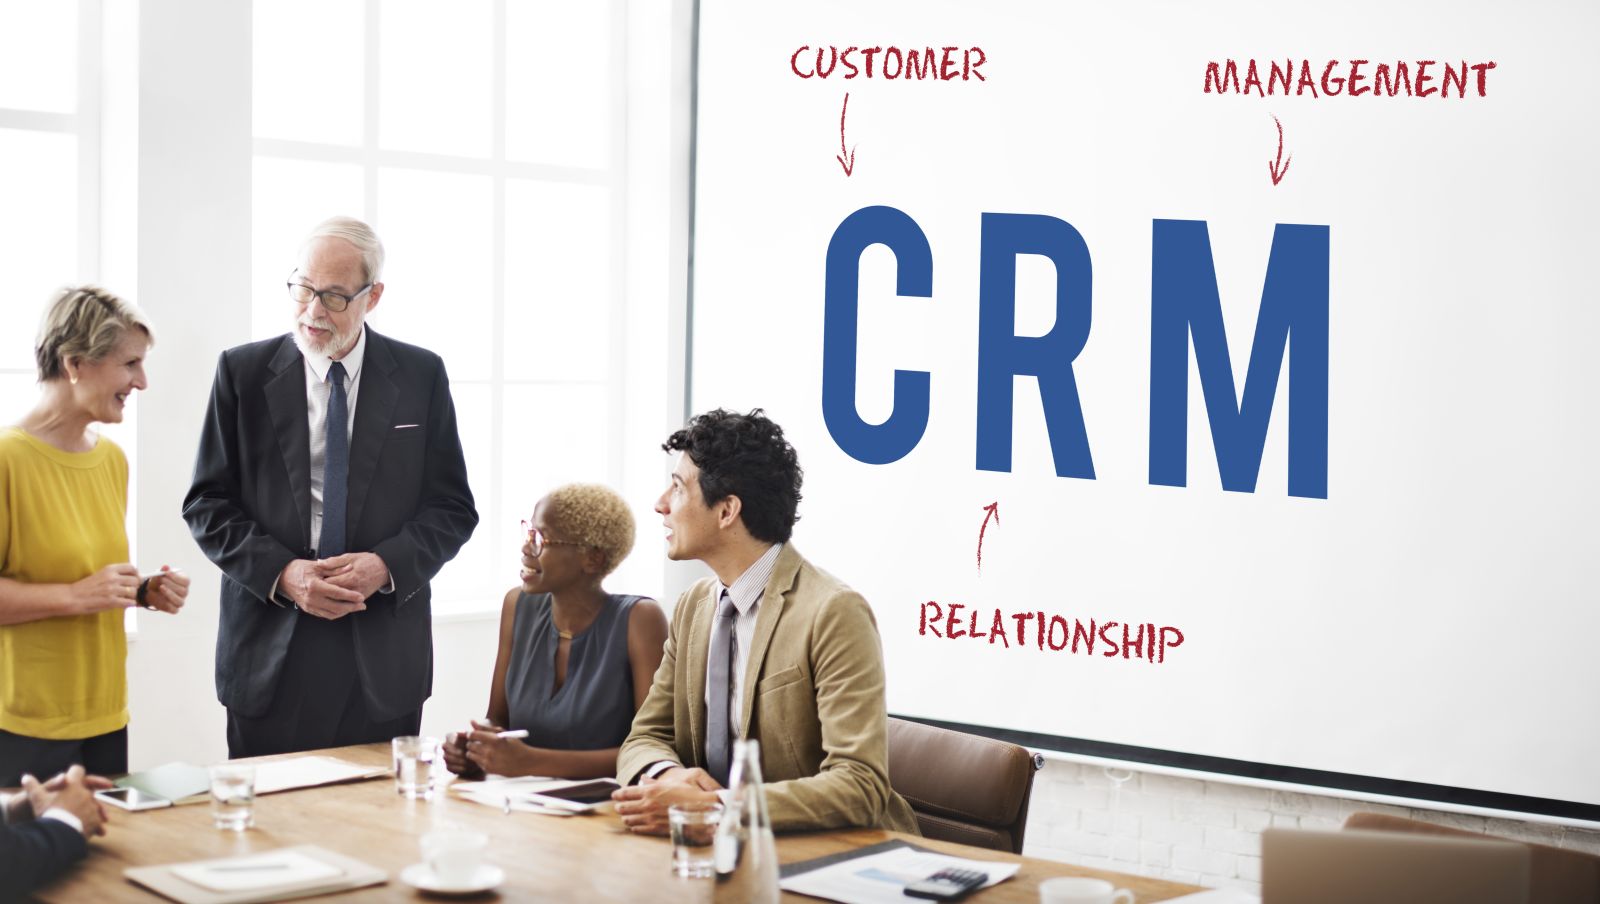 Benefits of using CRM in Real Estate to manage Customer Relationships